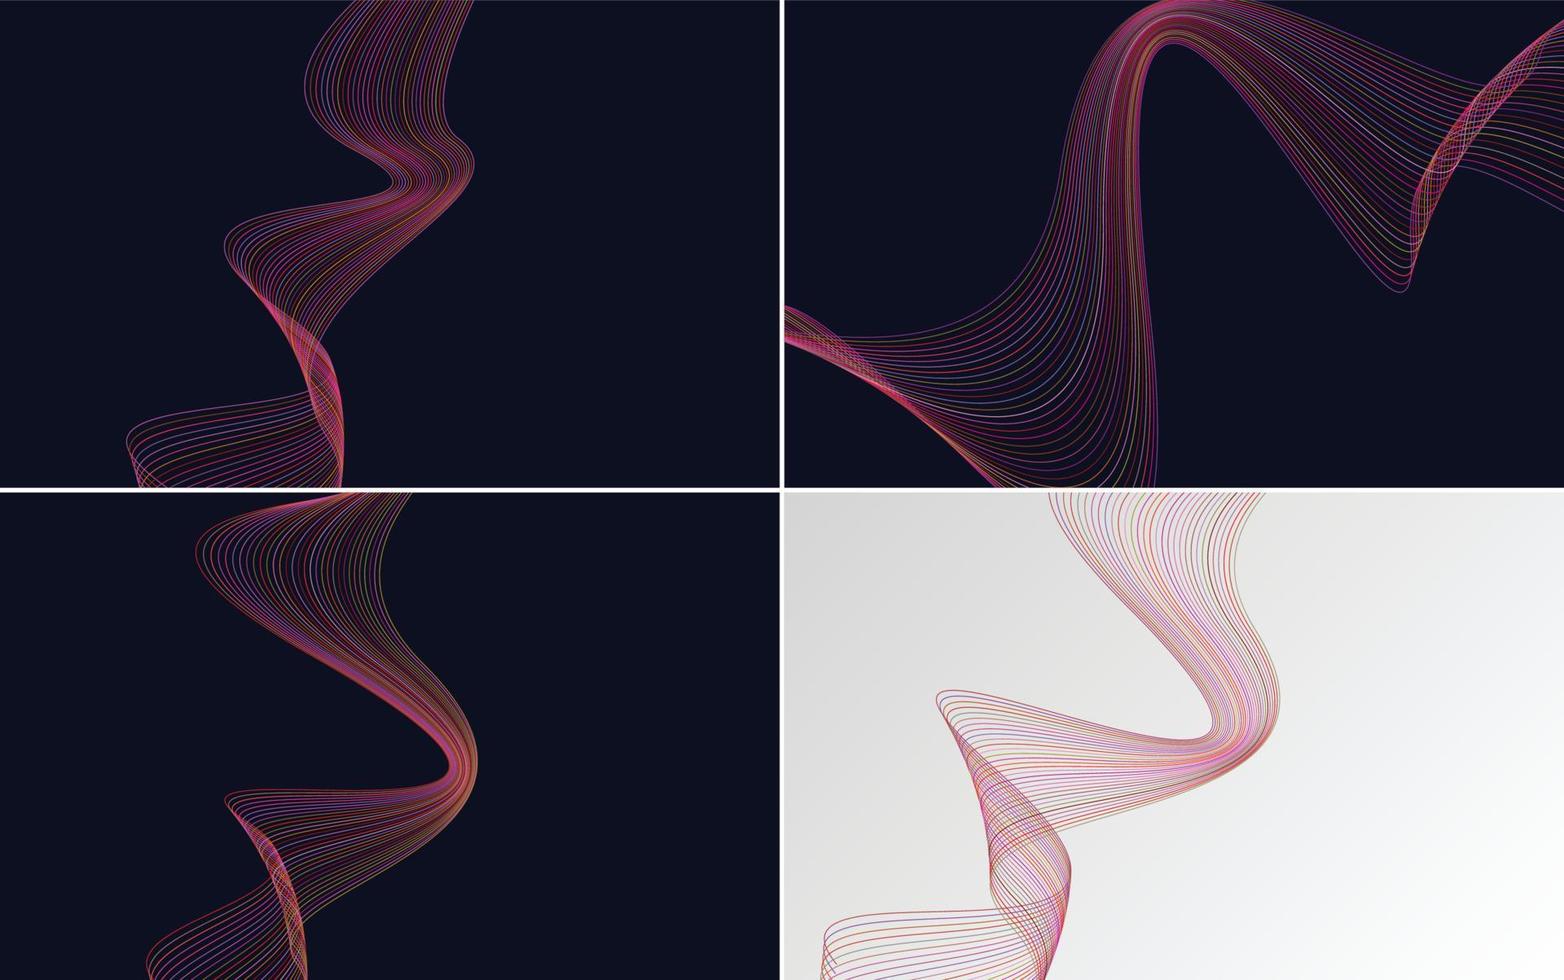 Set of 4 vector backgrounds featuring geometric wave patterns